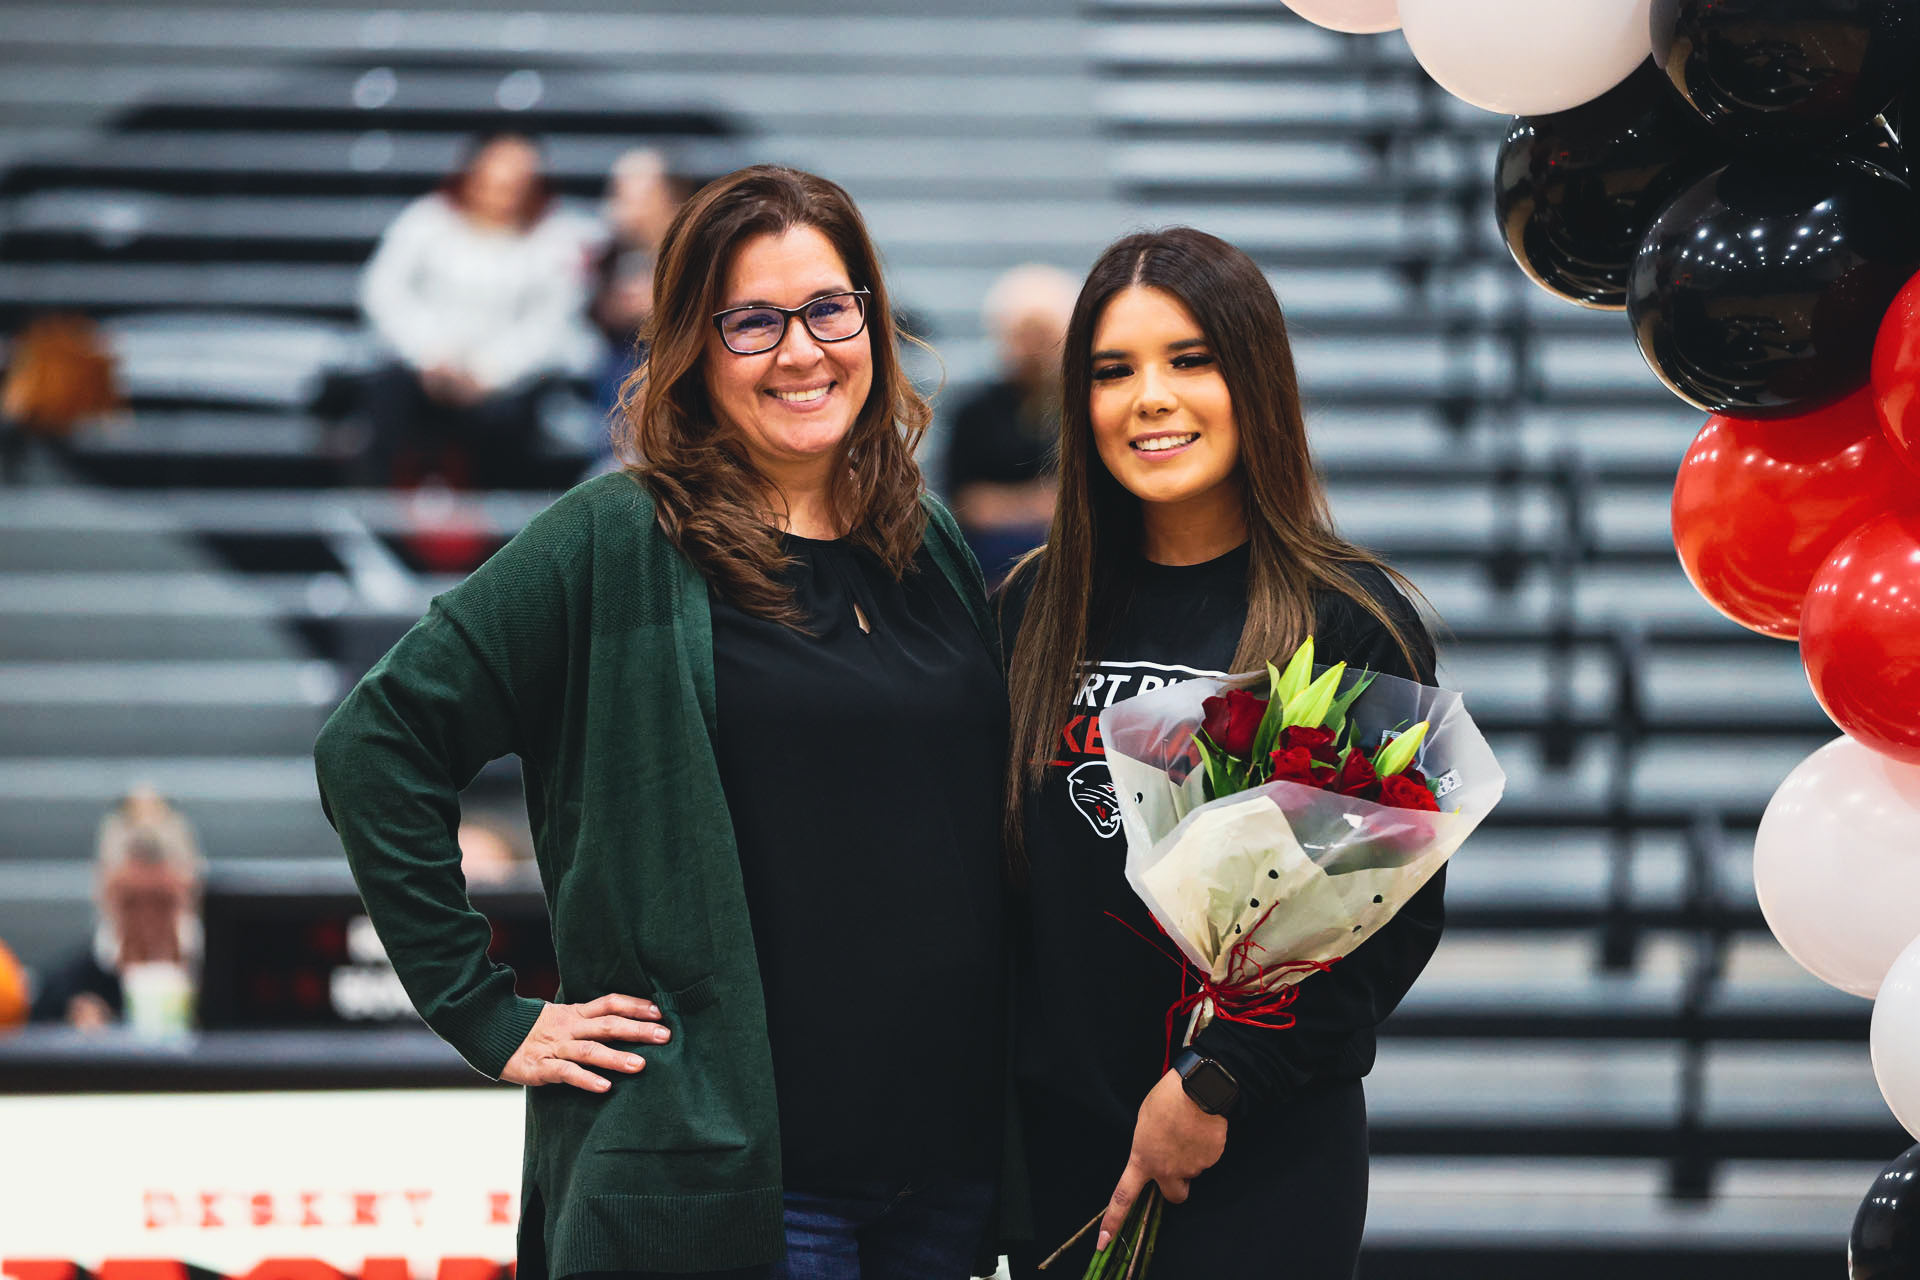 DRHS Basketball Team Manager with her mother